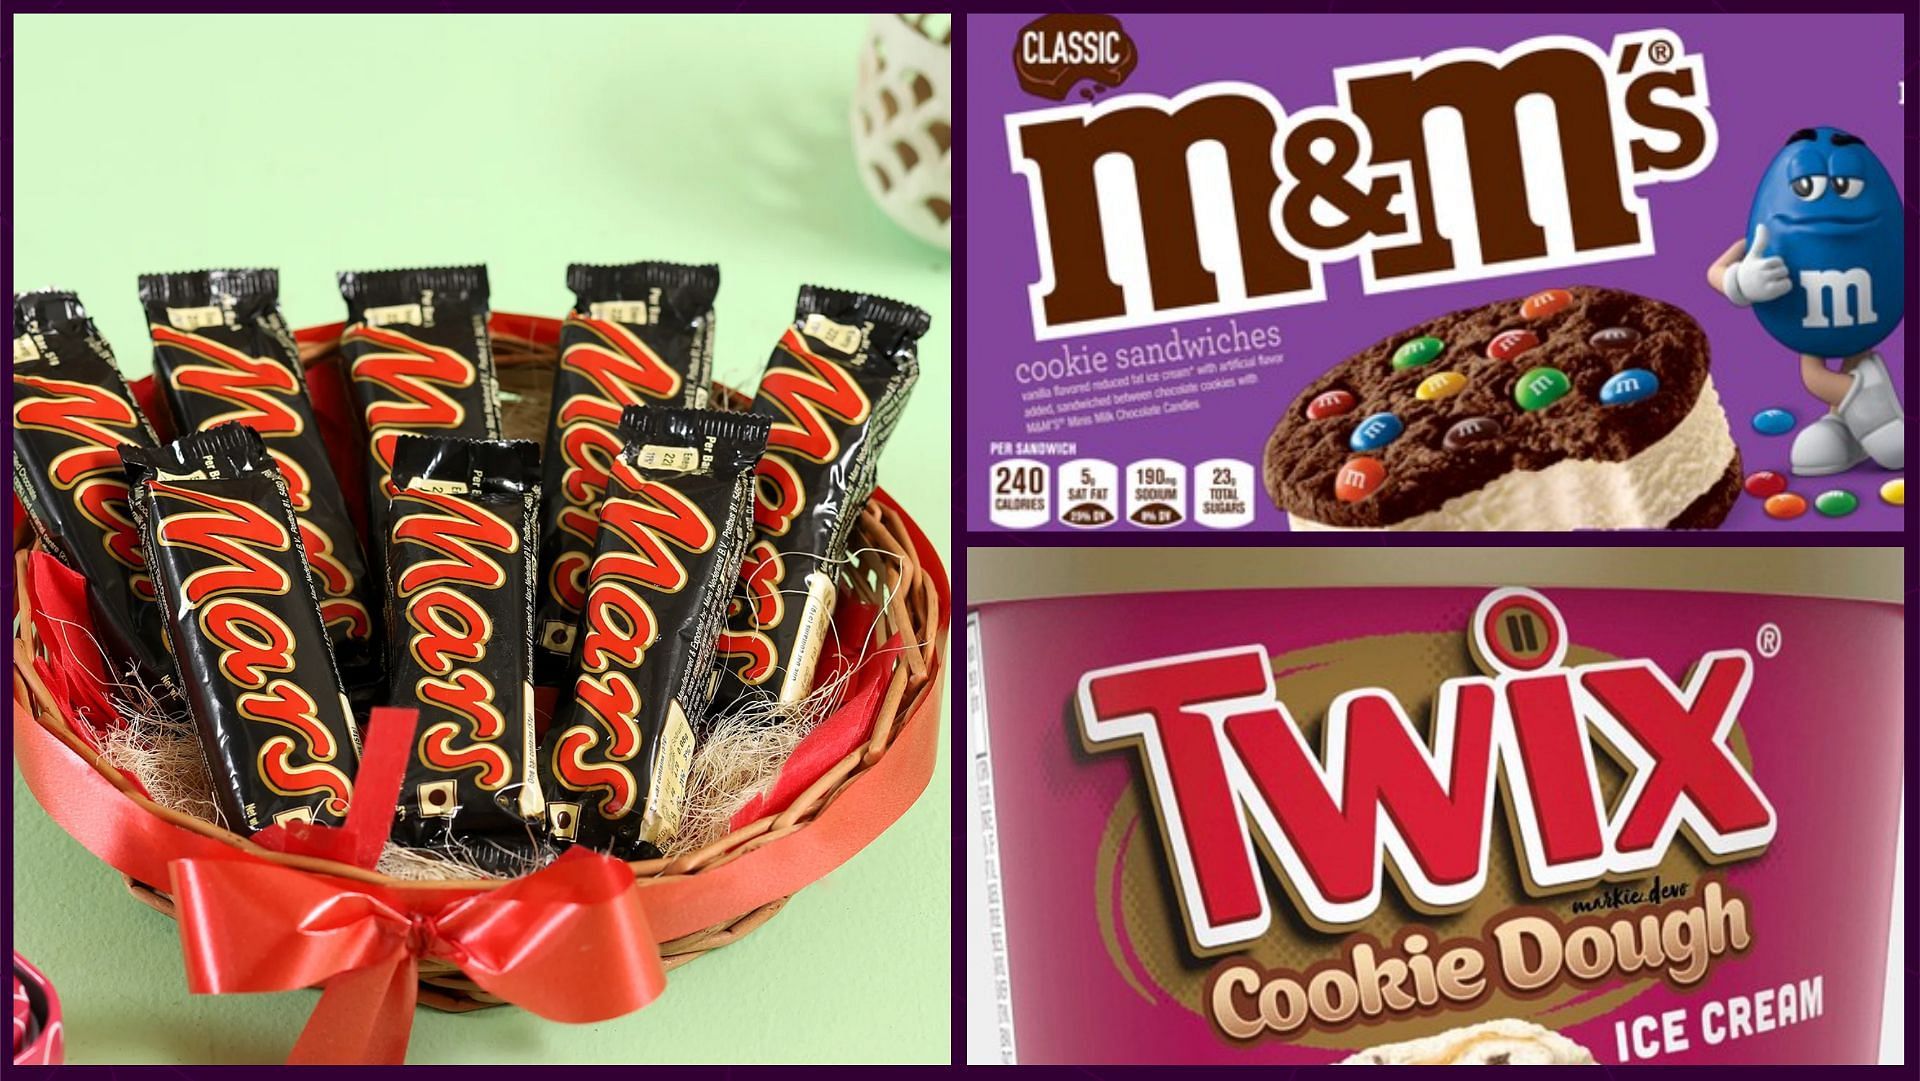 Mars is set to bring new ice cream line-up in March 2023! (Image via FNP, M&amp;M, Twix)